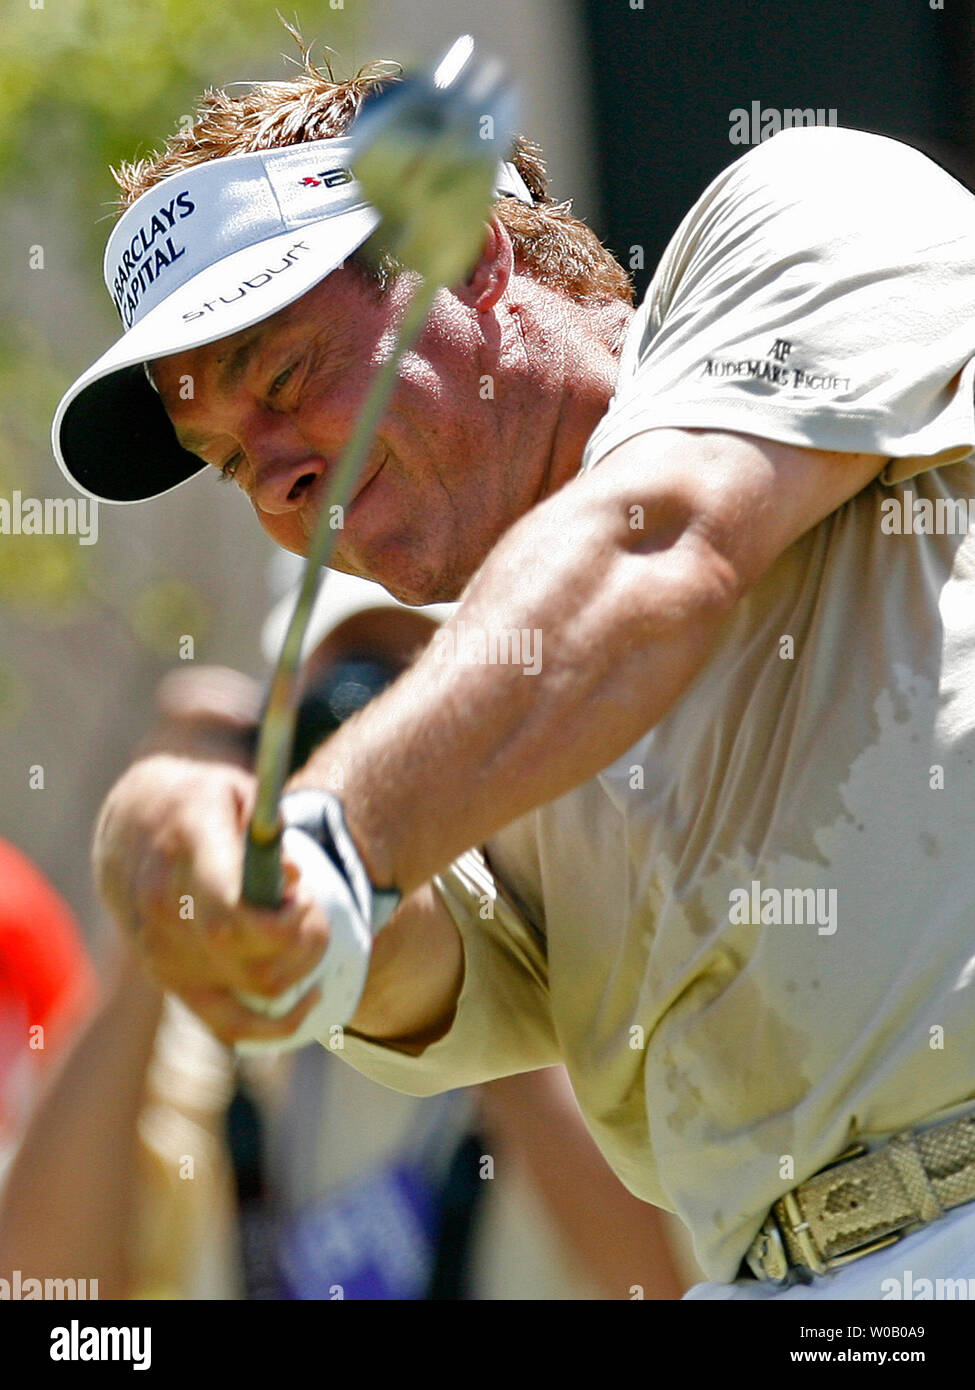 Northern Ireland's Darren Clarke tees off from the first hole in the second  round of the 89th PGA Championship at Southern Hills Country Club in Tulsa, Oklahoma on August 10, 2007.   (UPI Photo/Gary C. Caskey) Stock Photo